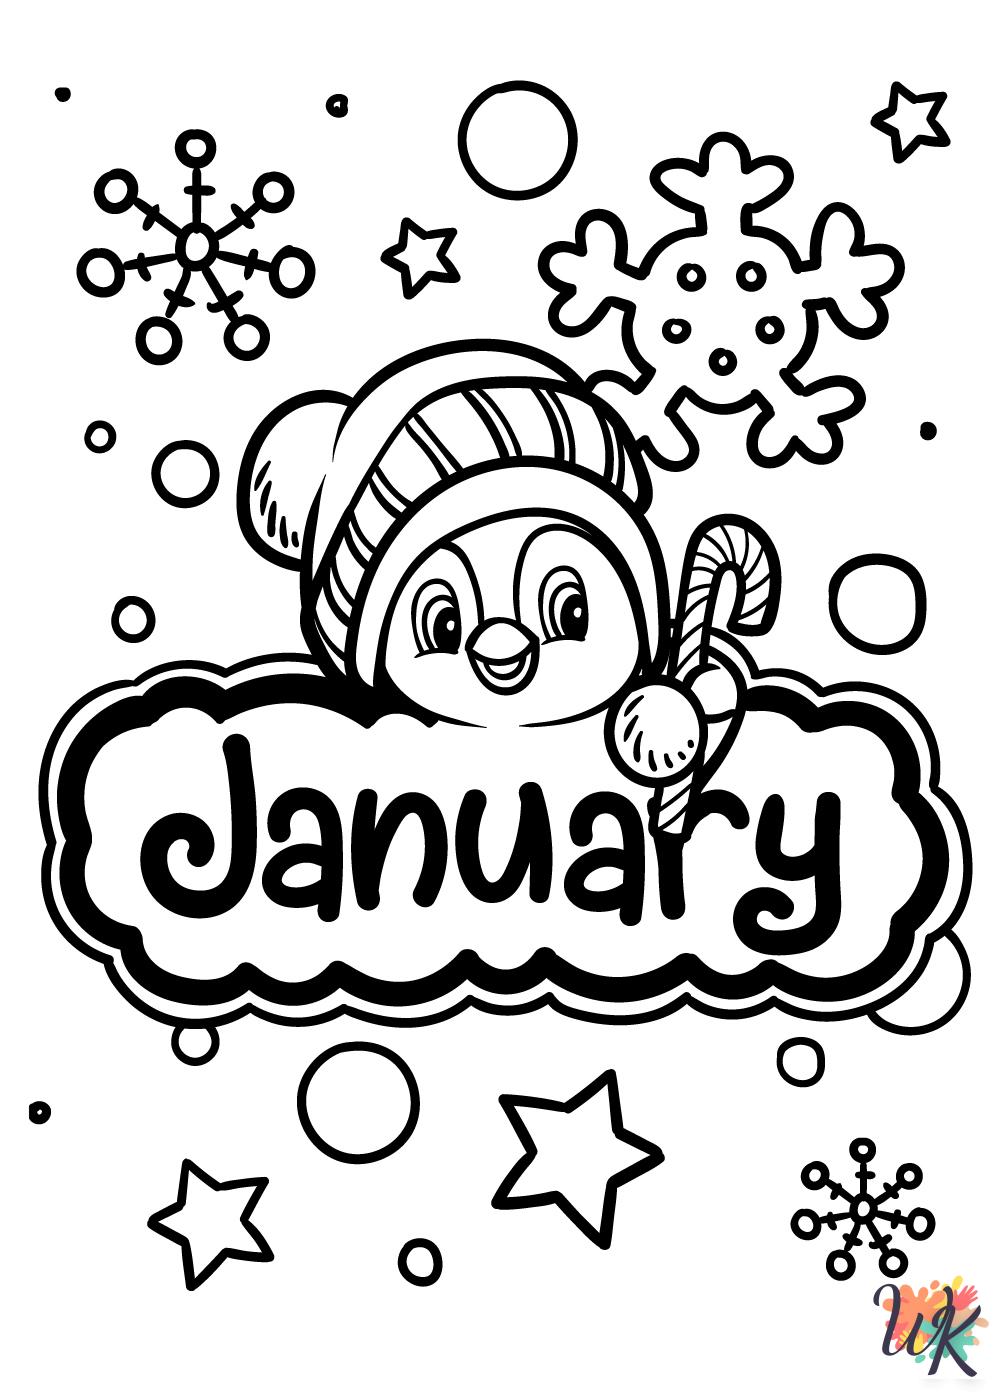 merry January coloring pages